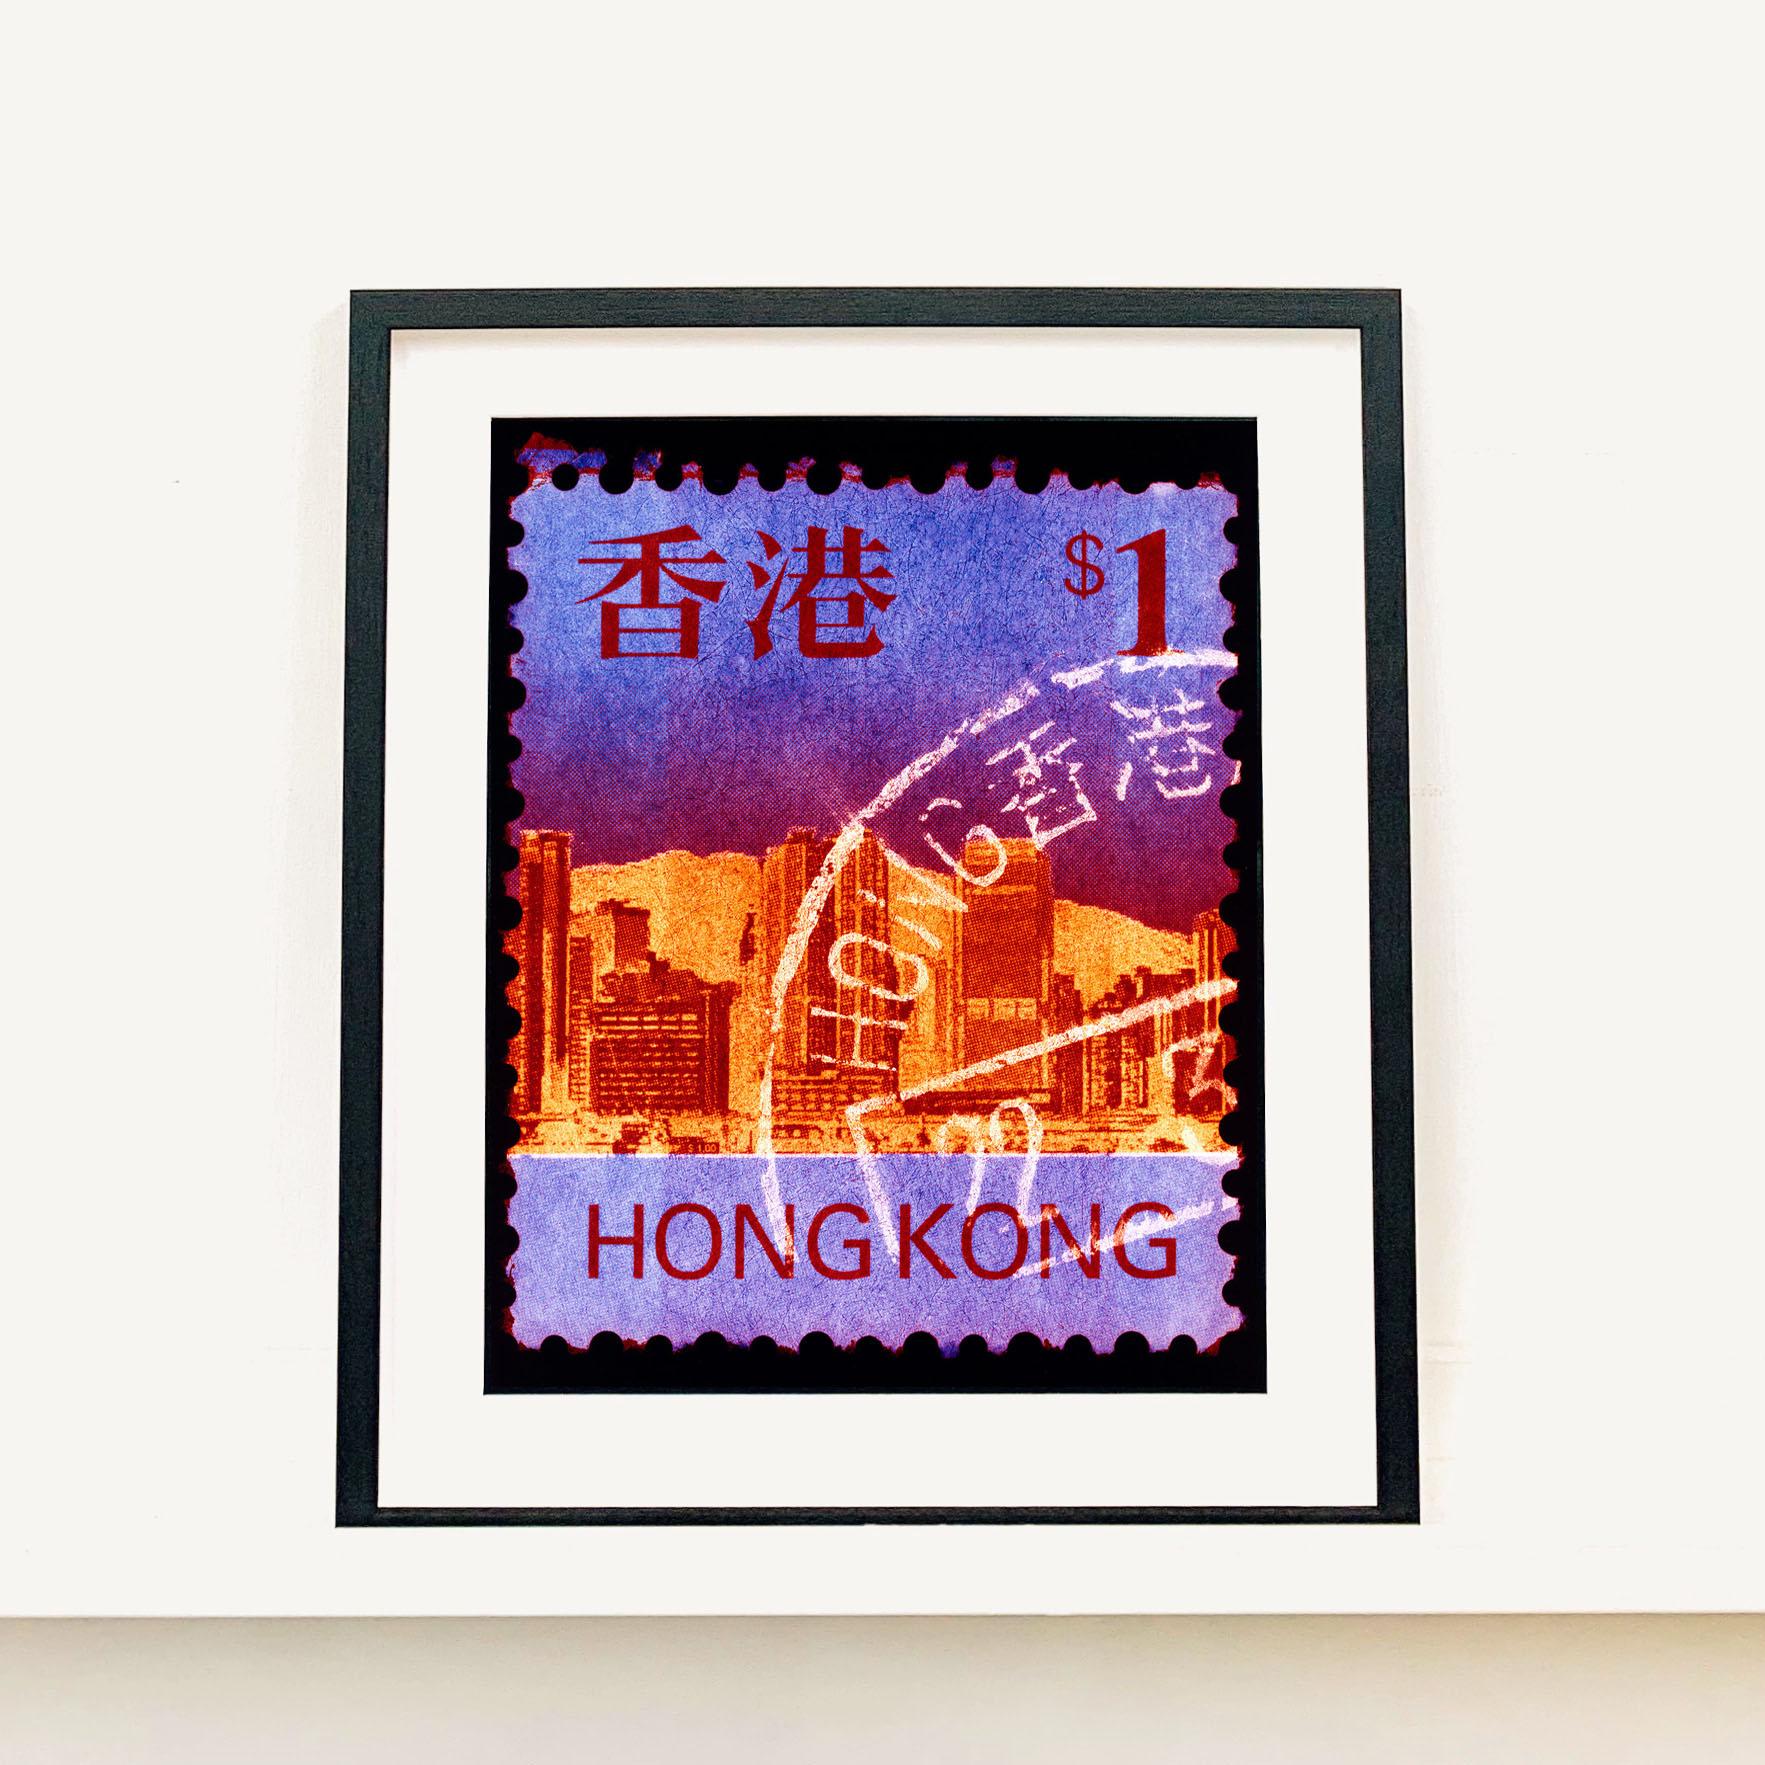 Stamp Collection, HK$1 - Pop Art Conceptual Color Photography - Print by Heidler & Heeps